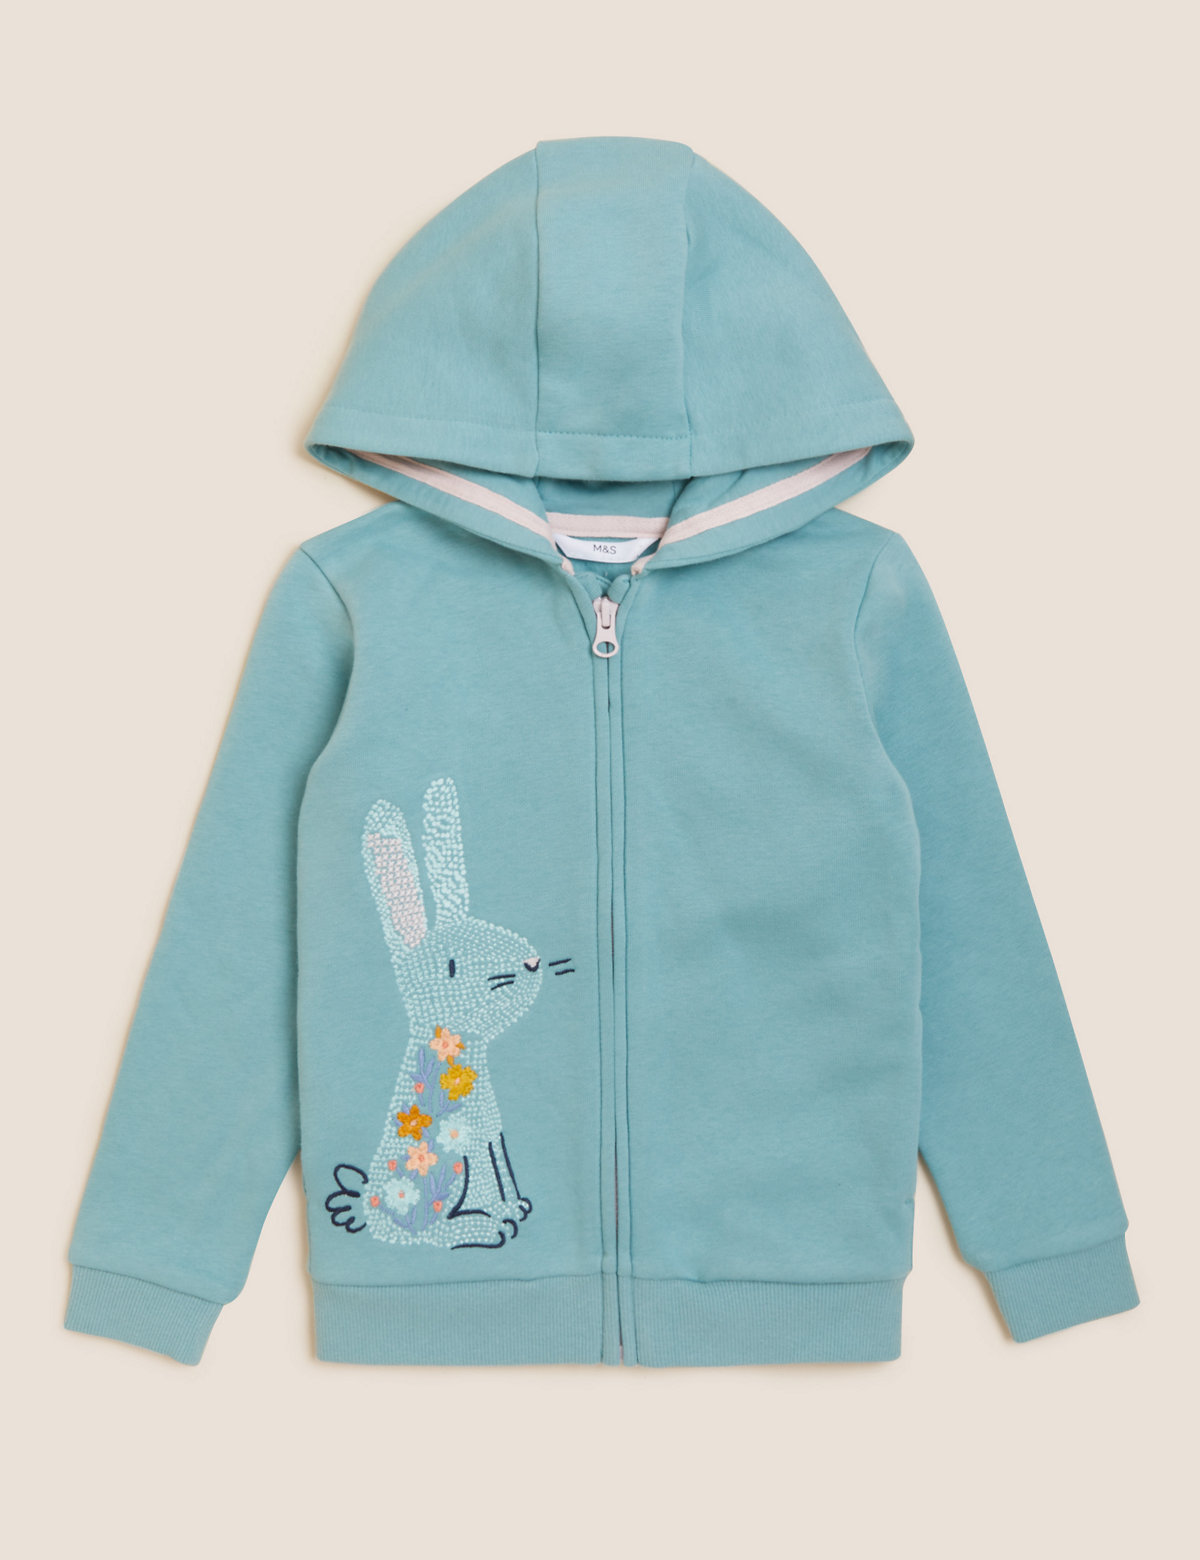 Cotton Rich Bunny Hoodie